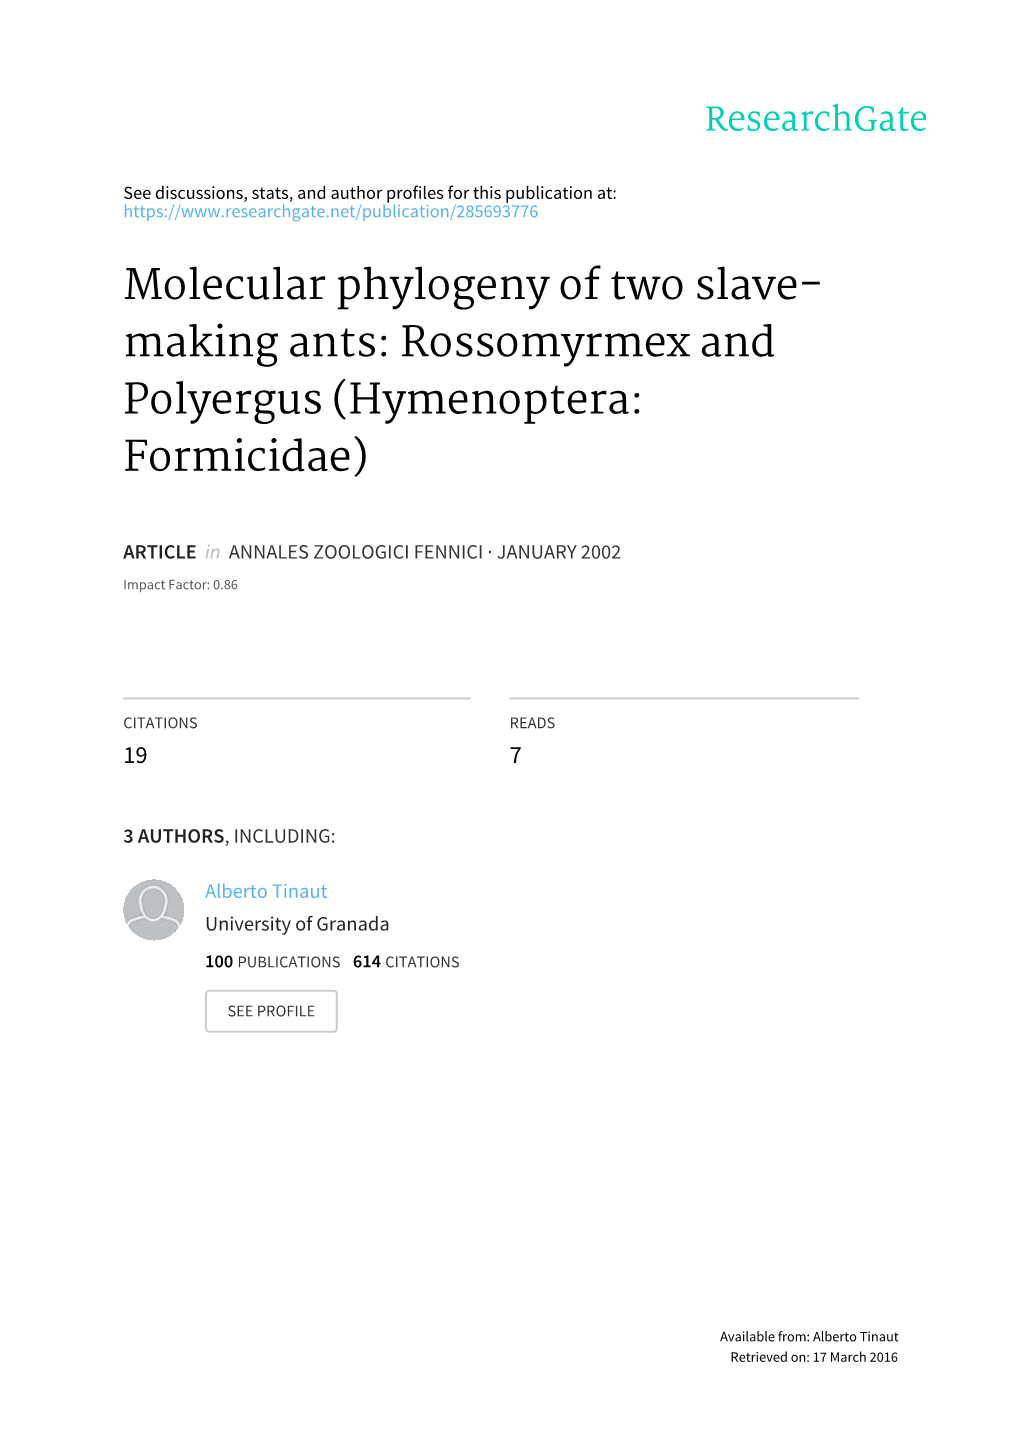 Molecular Phylogeny of Two Slave- Making Ants: Rossomyrmex and Polyergus (Hymenoptera: Formicidae)